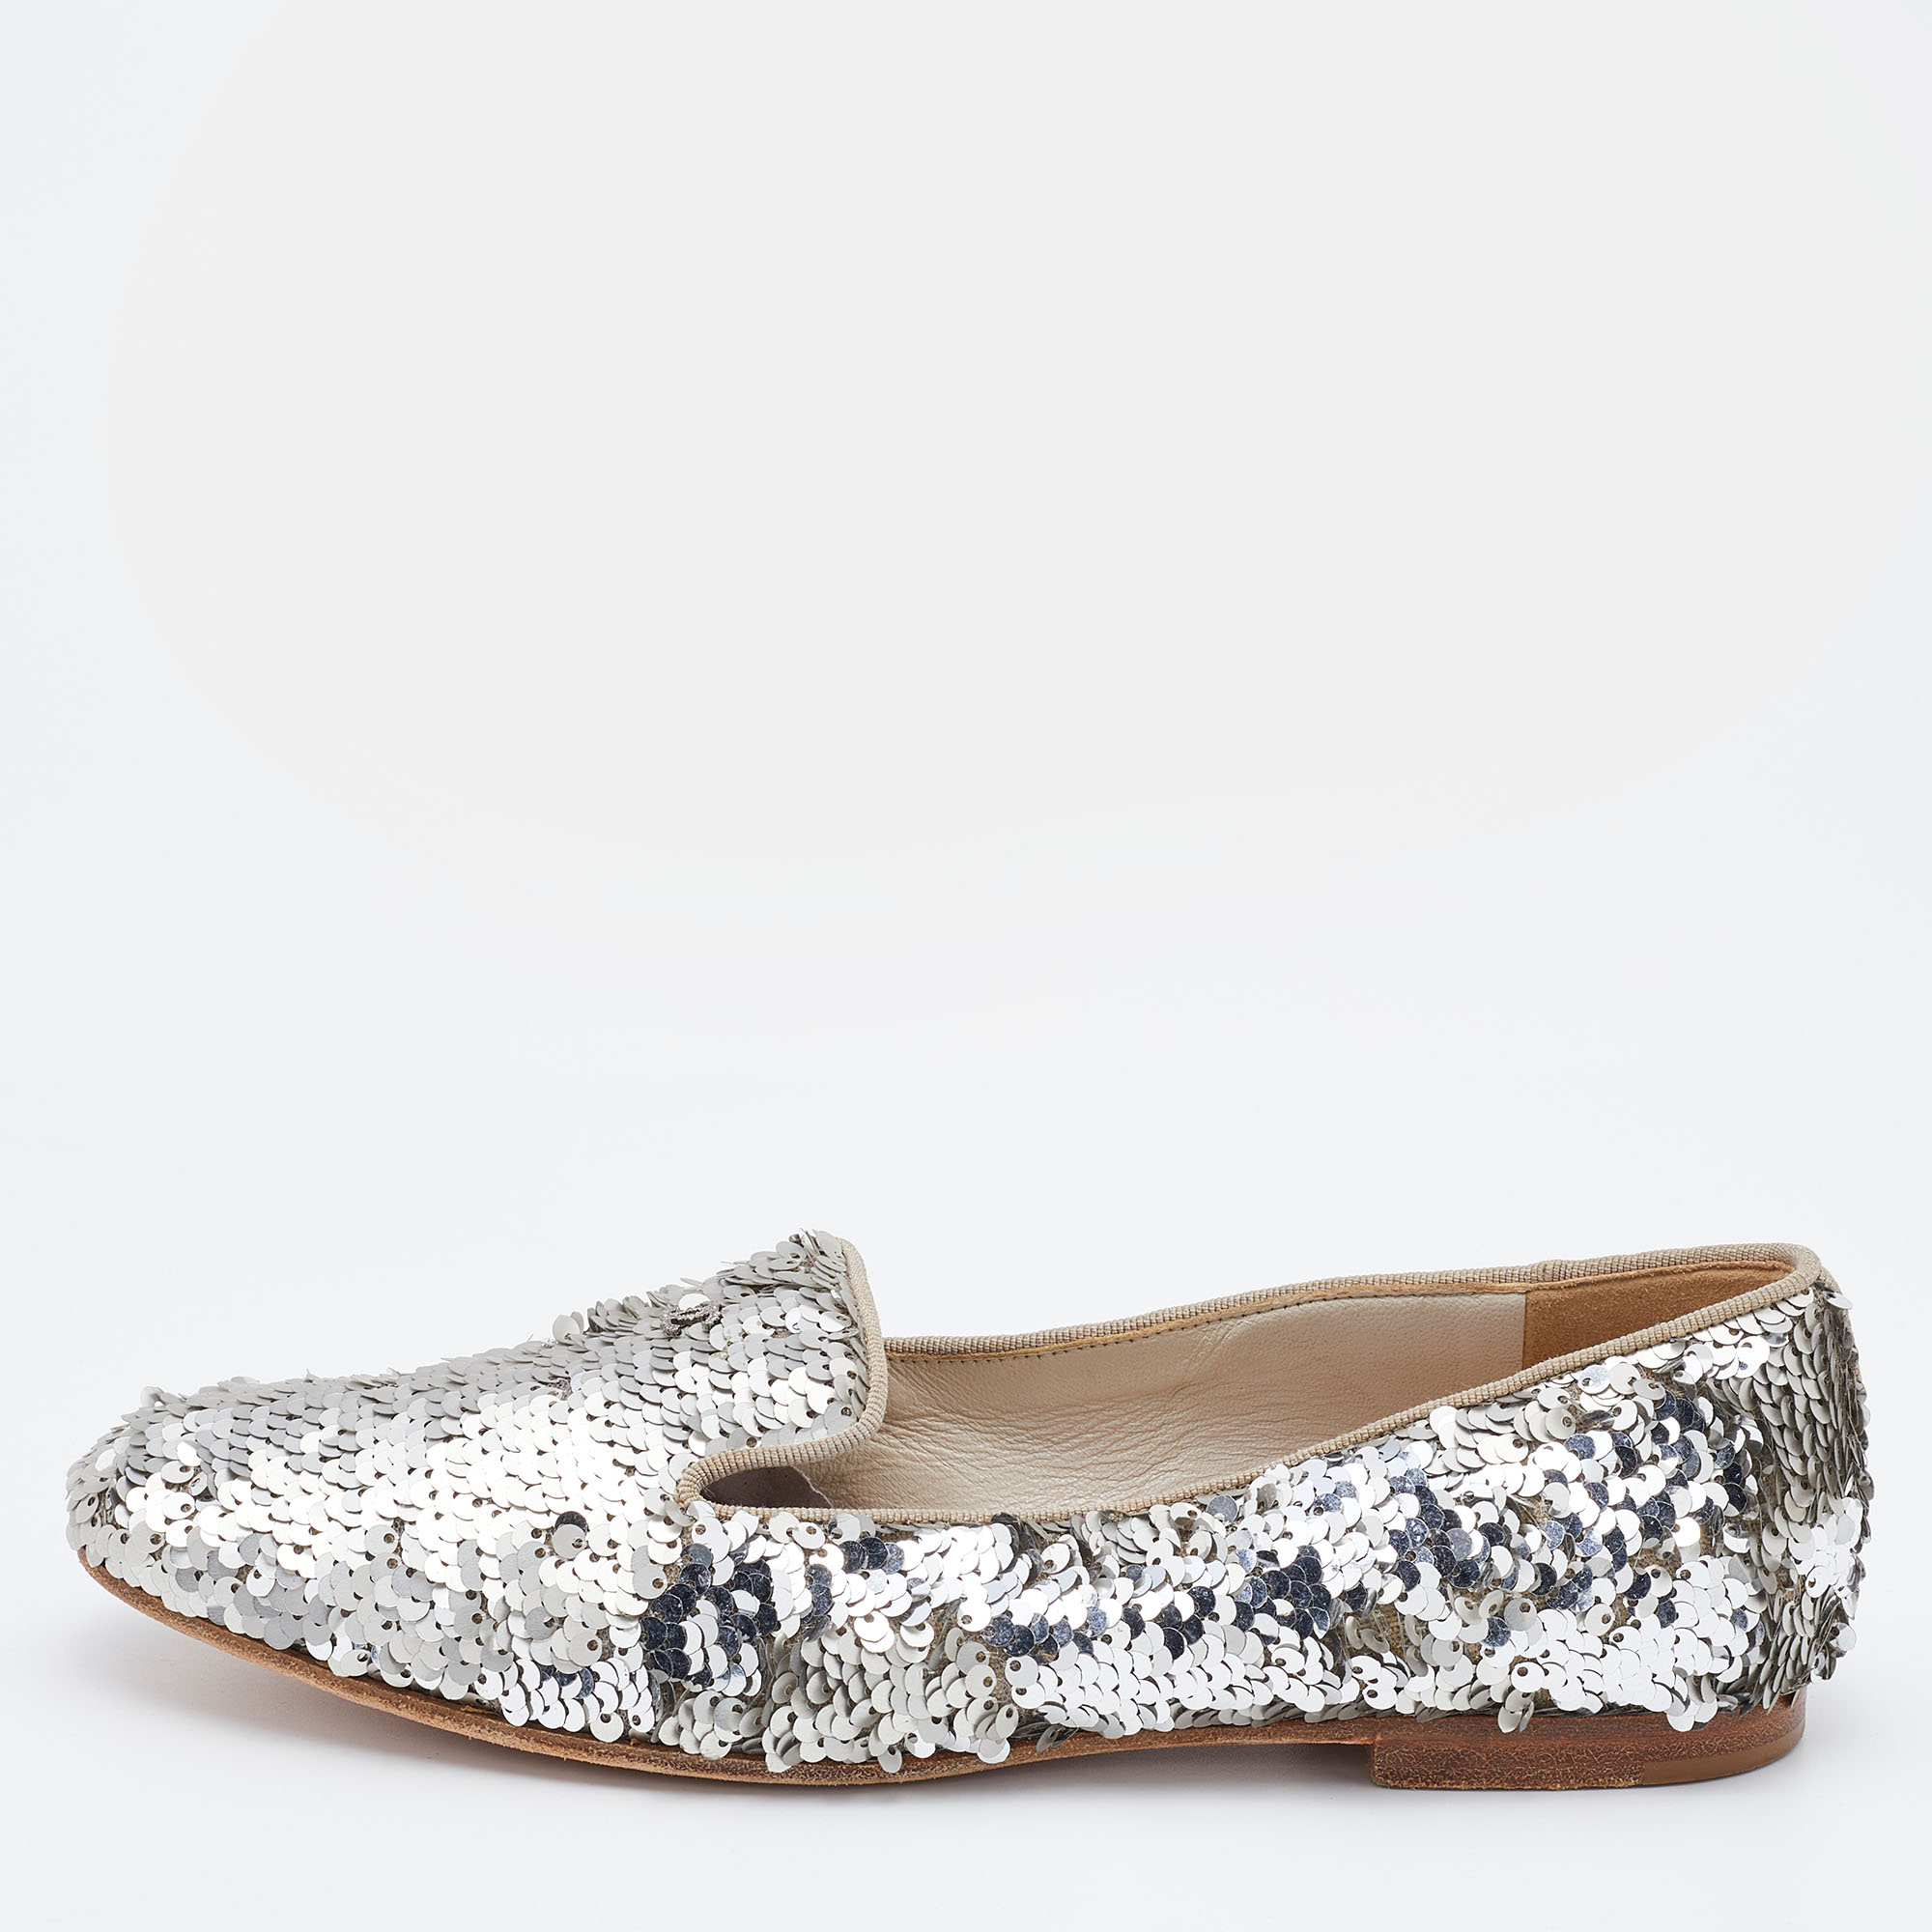 Pre-owned Chanel Silver Sequin Cc Smoking Slippers Size 38.5